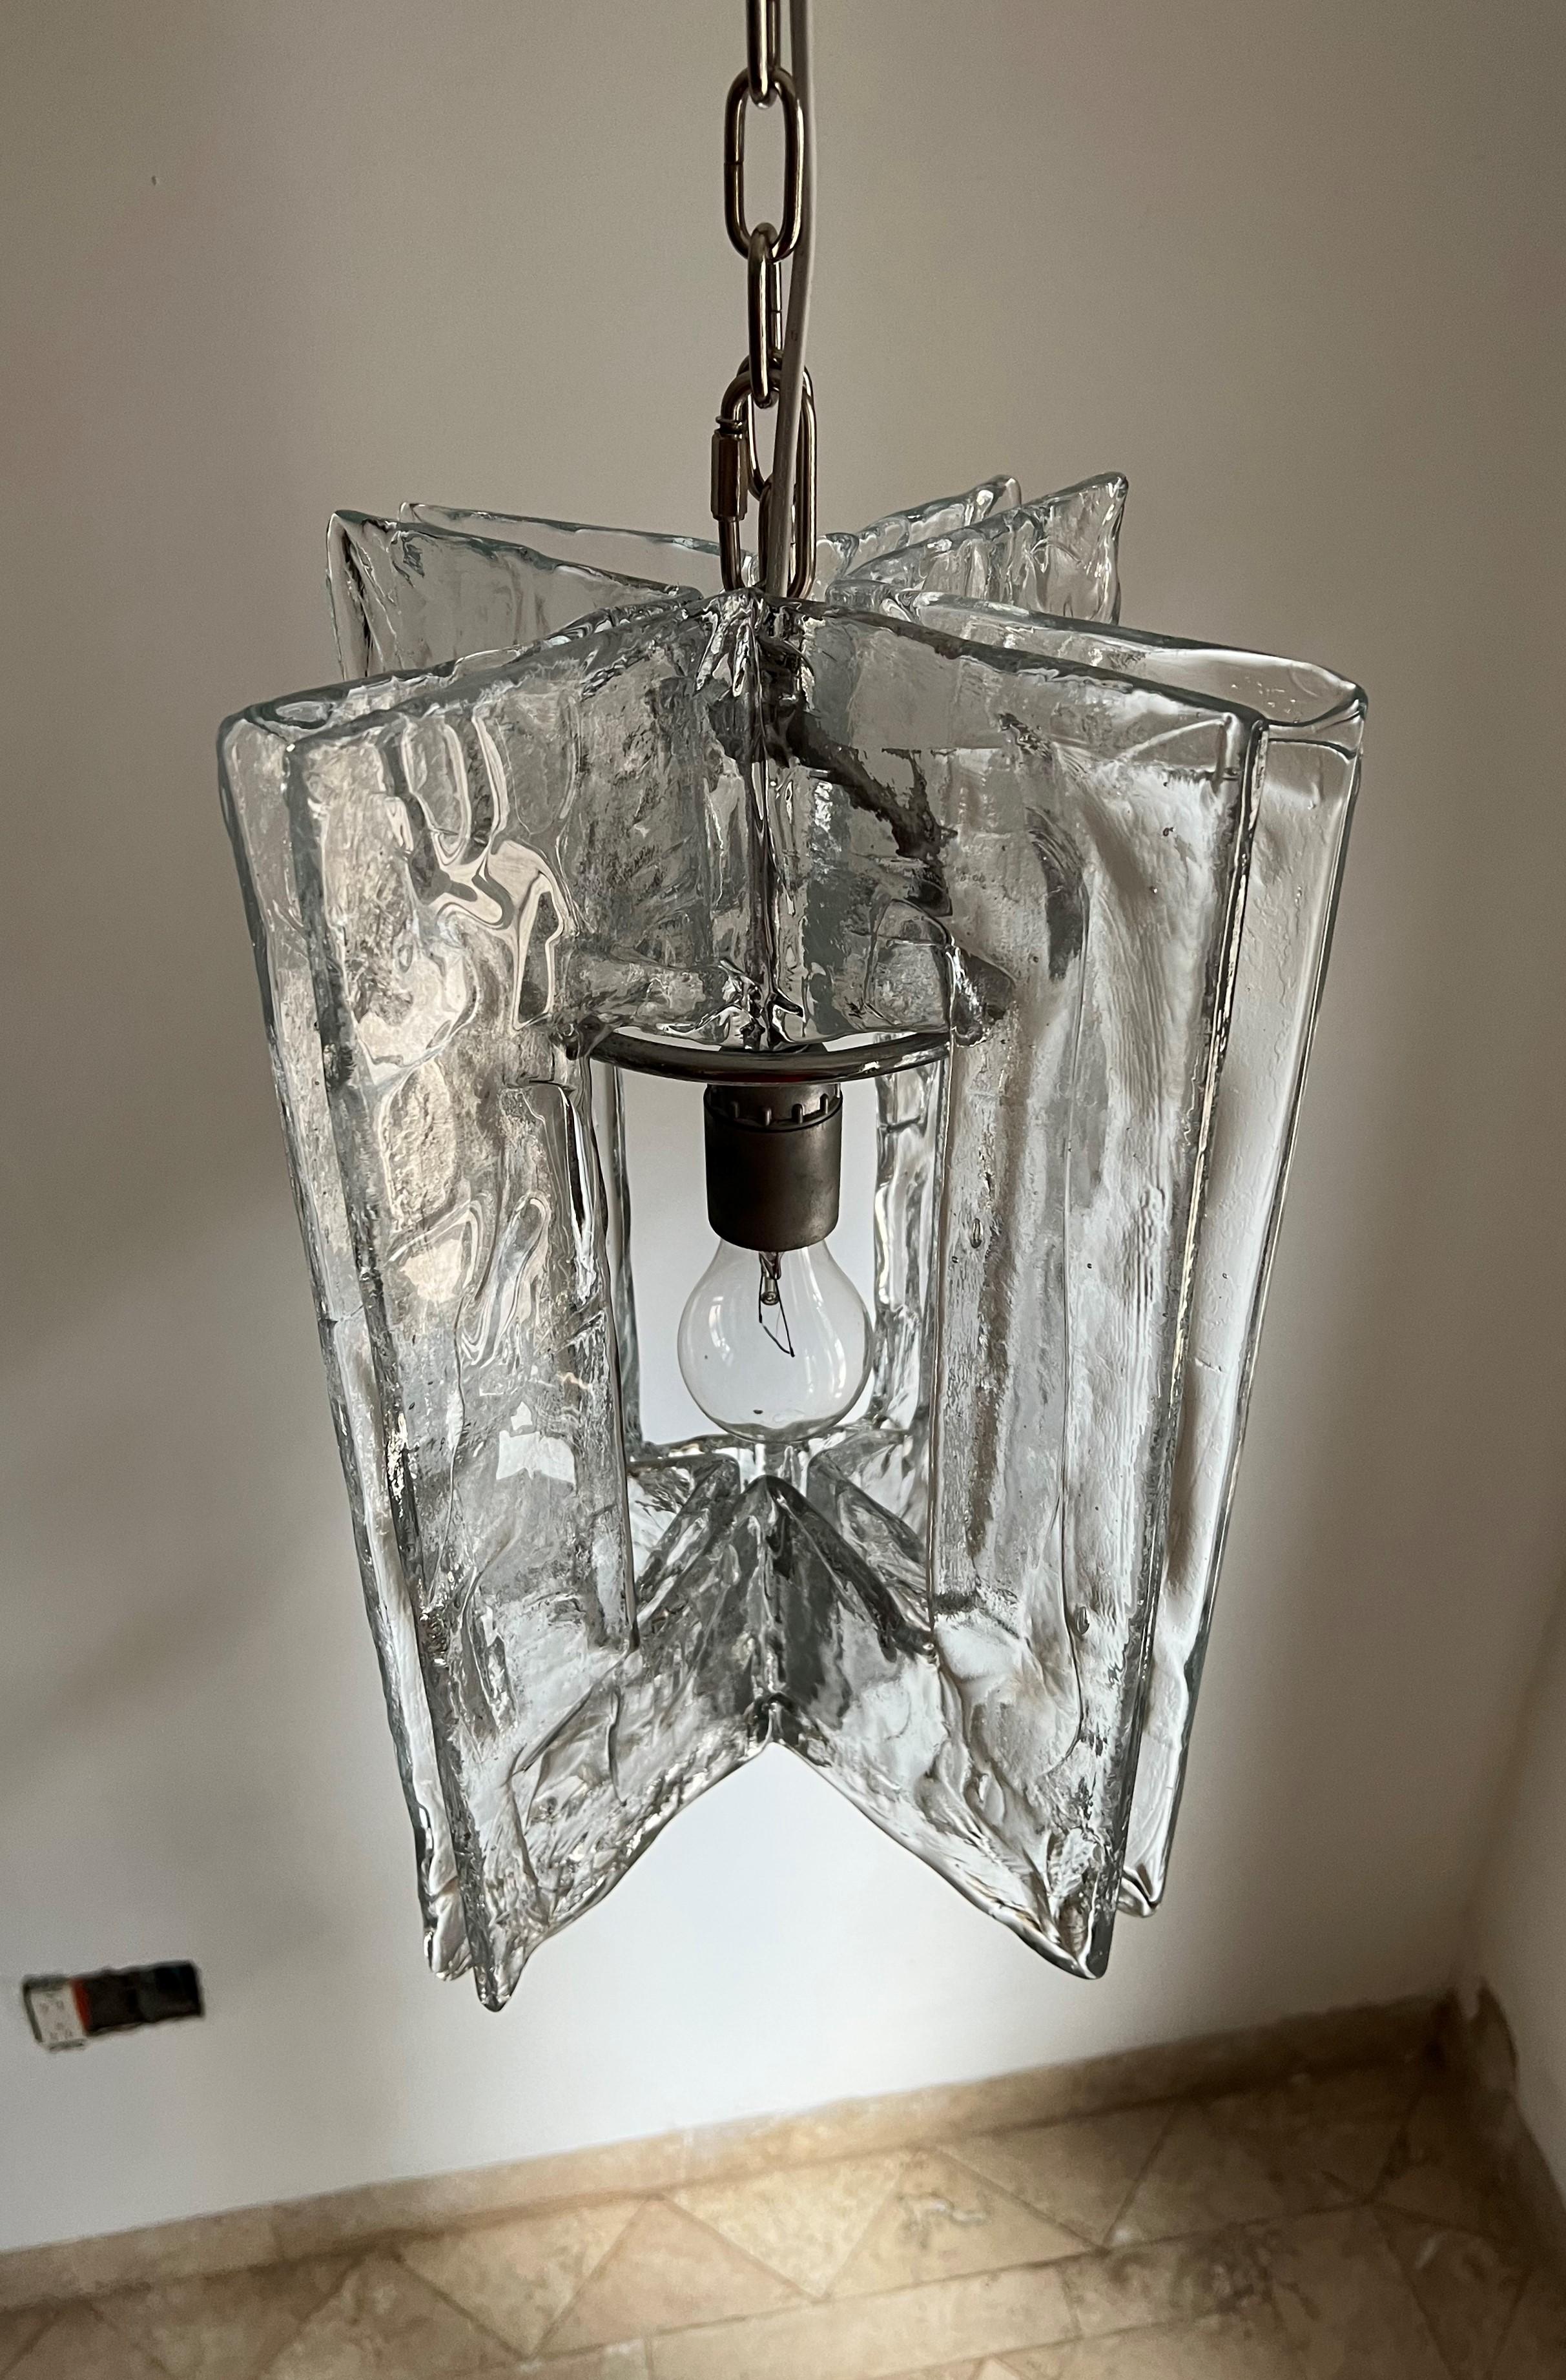 Space age chandelier manufactured in chromed metal and 4 large pieces of clear Murano glass.
It takes 1 e27 bulb.
Made in Murano Italy circa 1970 by Mazzega under the direction of Carlo Nason.
Length of each glass slab is 40 cm and the diameter